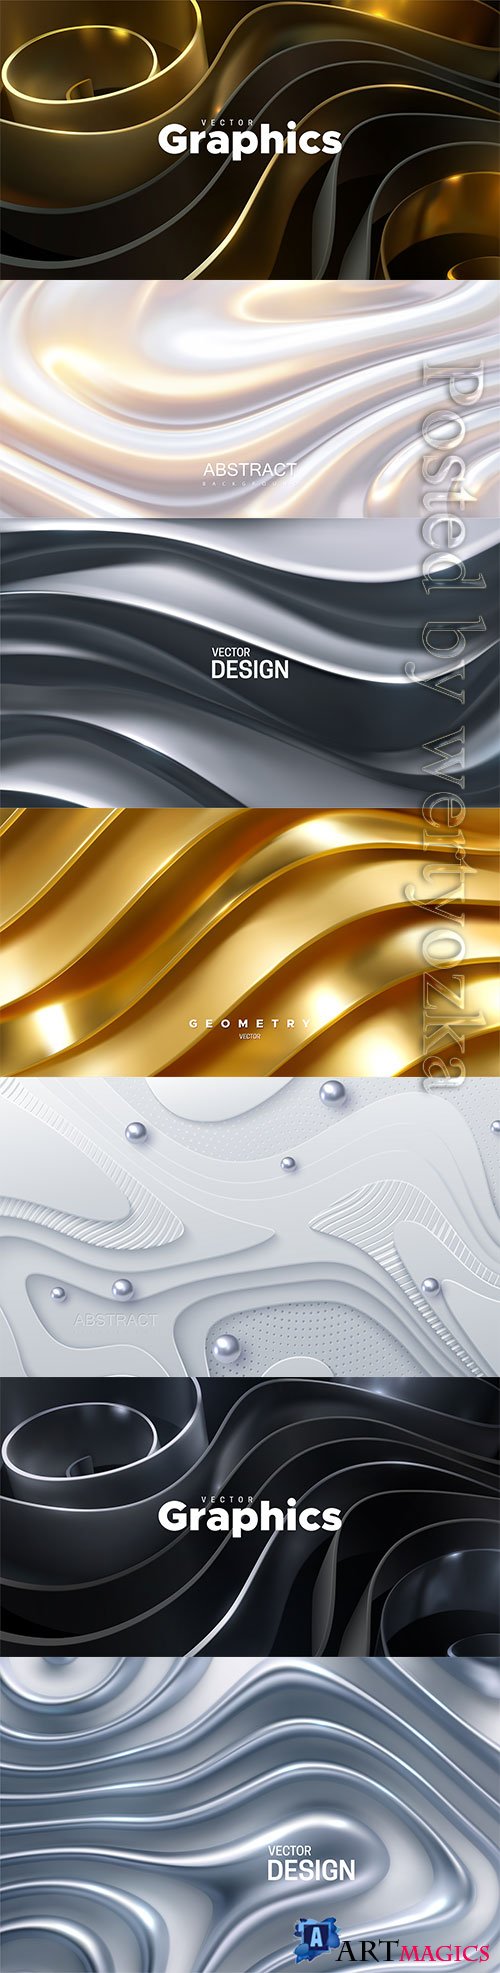 Luxury abstract vector backgrounds with golden lines